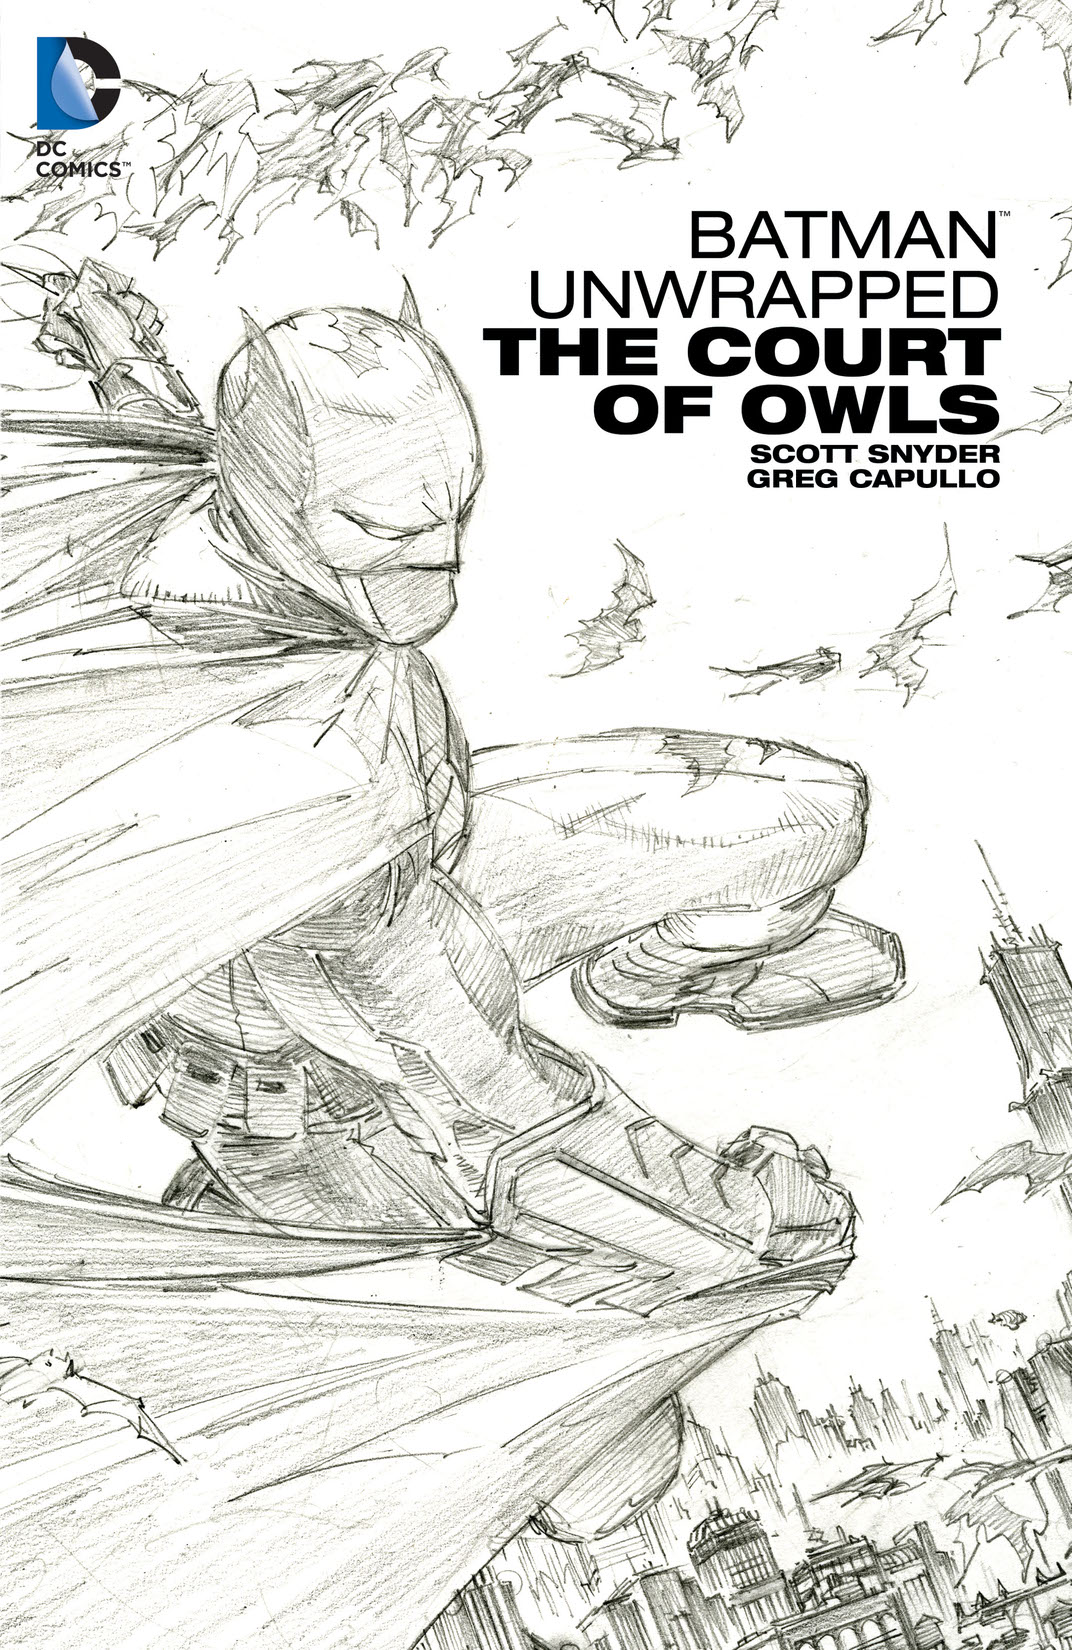 Batman Unwrapped: The Court of Owls preview images